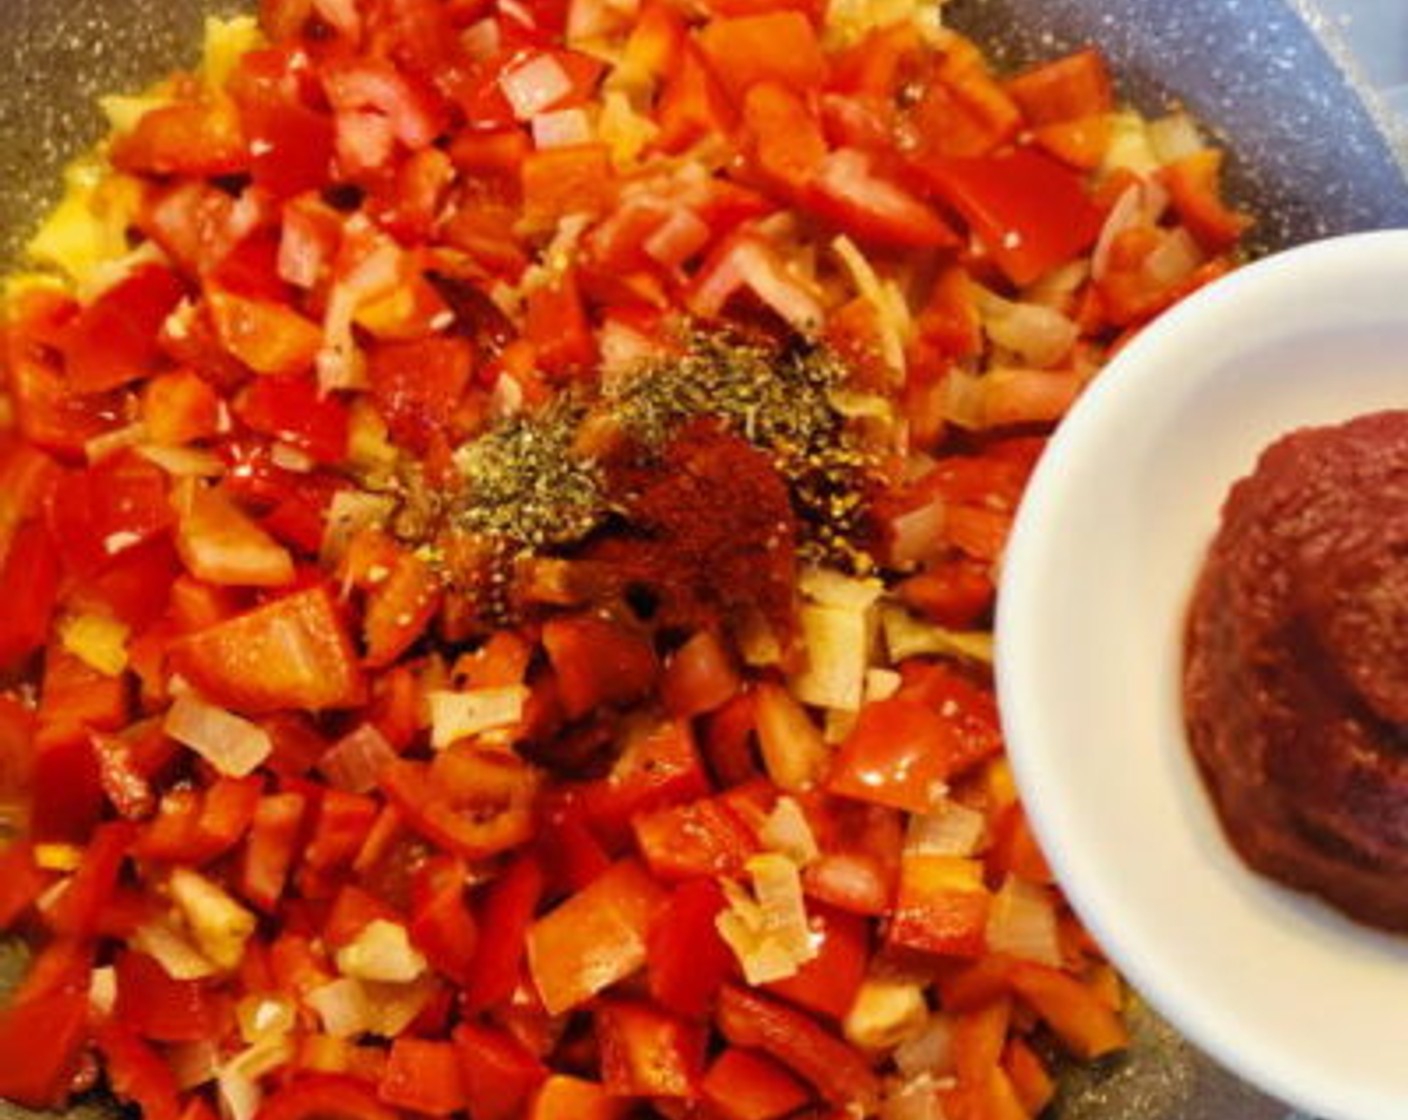 step 3 Season with Salt (1 tsp), Ground Black Pepper (1/2 tsp), Smoked Paprika (1/2 tsp), Red Chili Powder (1 tsp), Crushed Red Pepper Flakes (1/2 tsp), and Dried Oregano (1 tsp) followed by adding in the Tomato Paste (1 Tbsp). Adjust the spice level and heat as per your taste (more or less depending on what you like).